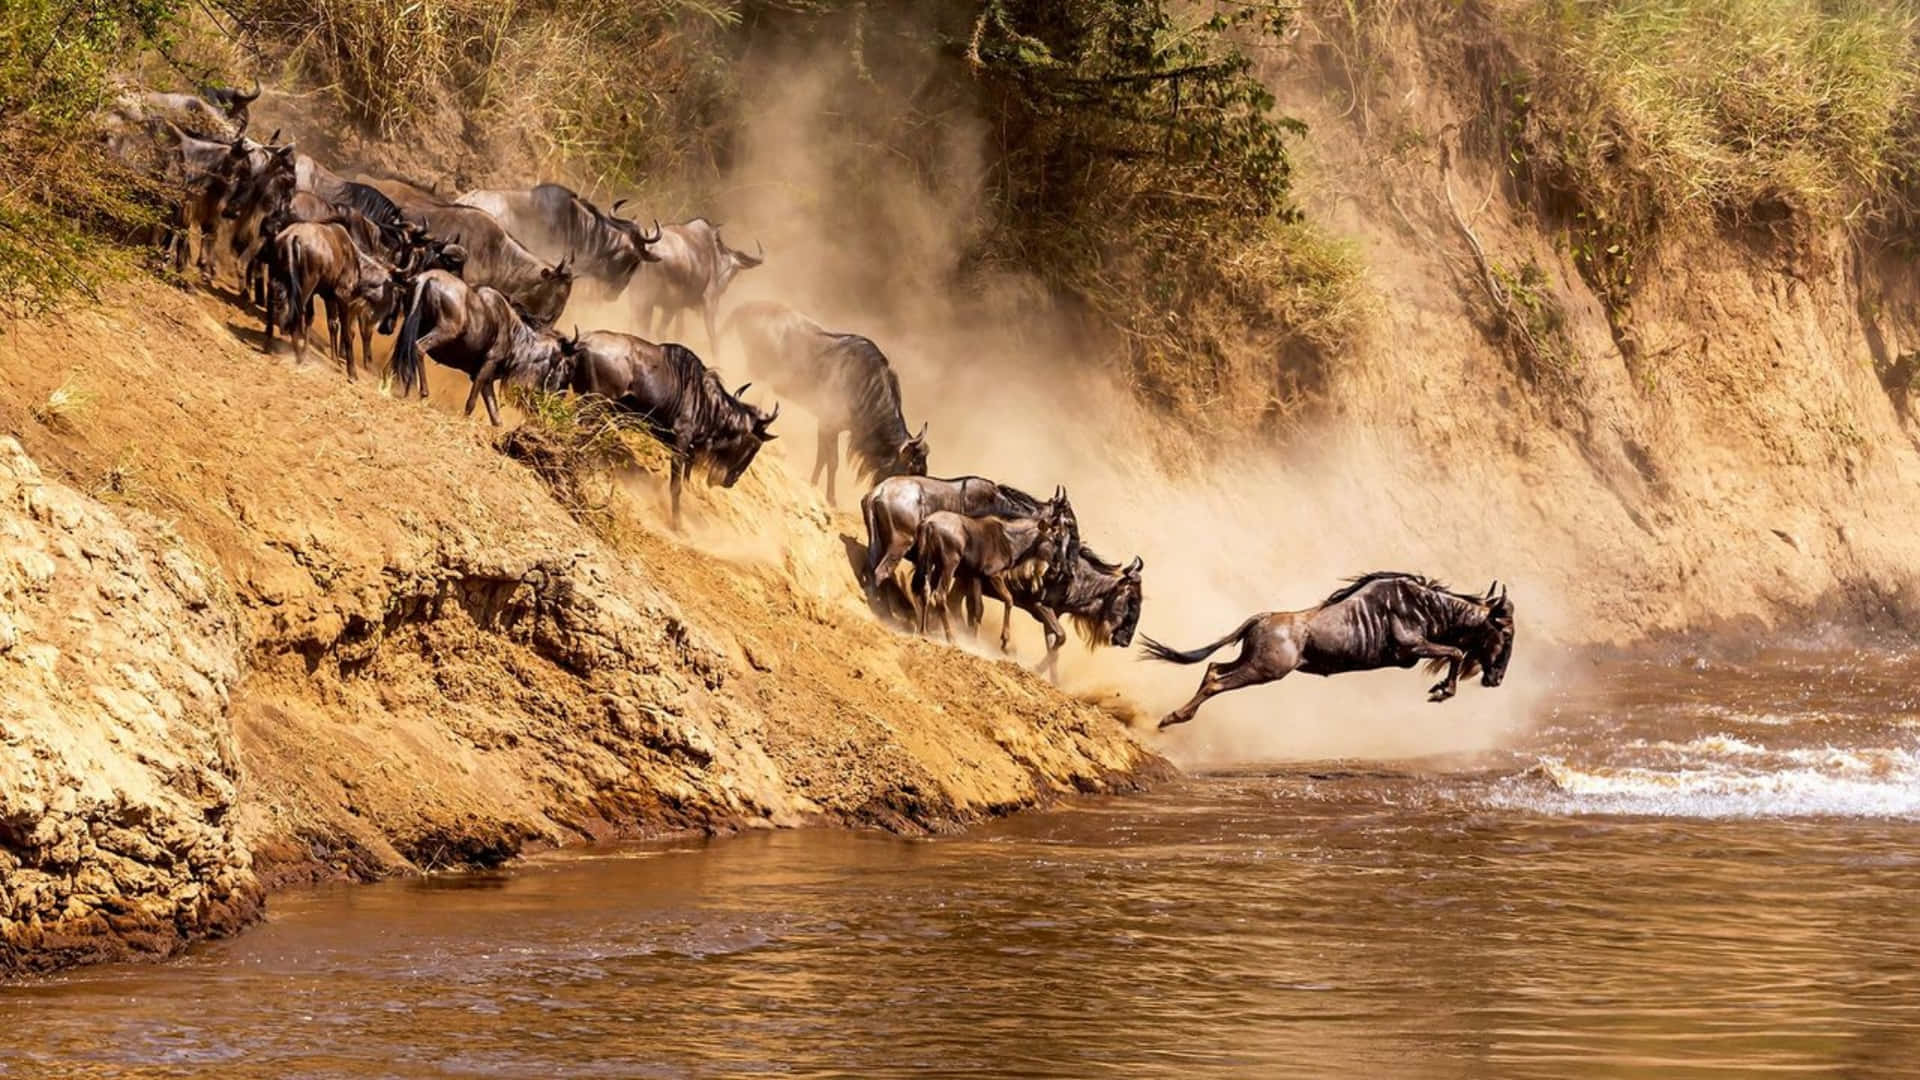 Wildebeest River Crossing Dramatic Leap Wallpaper